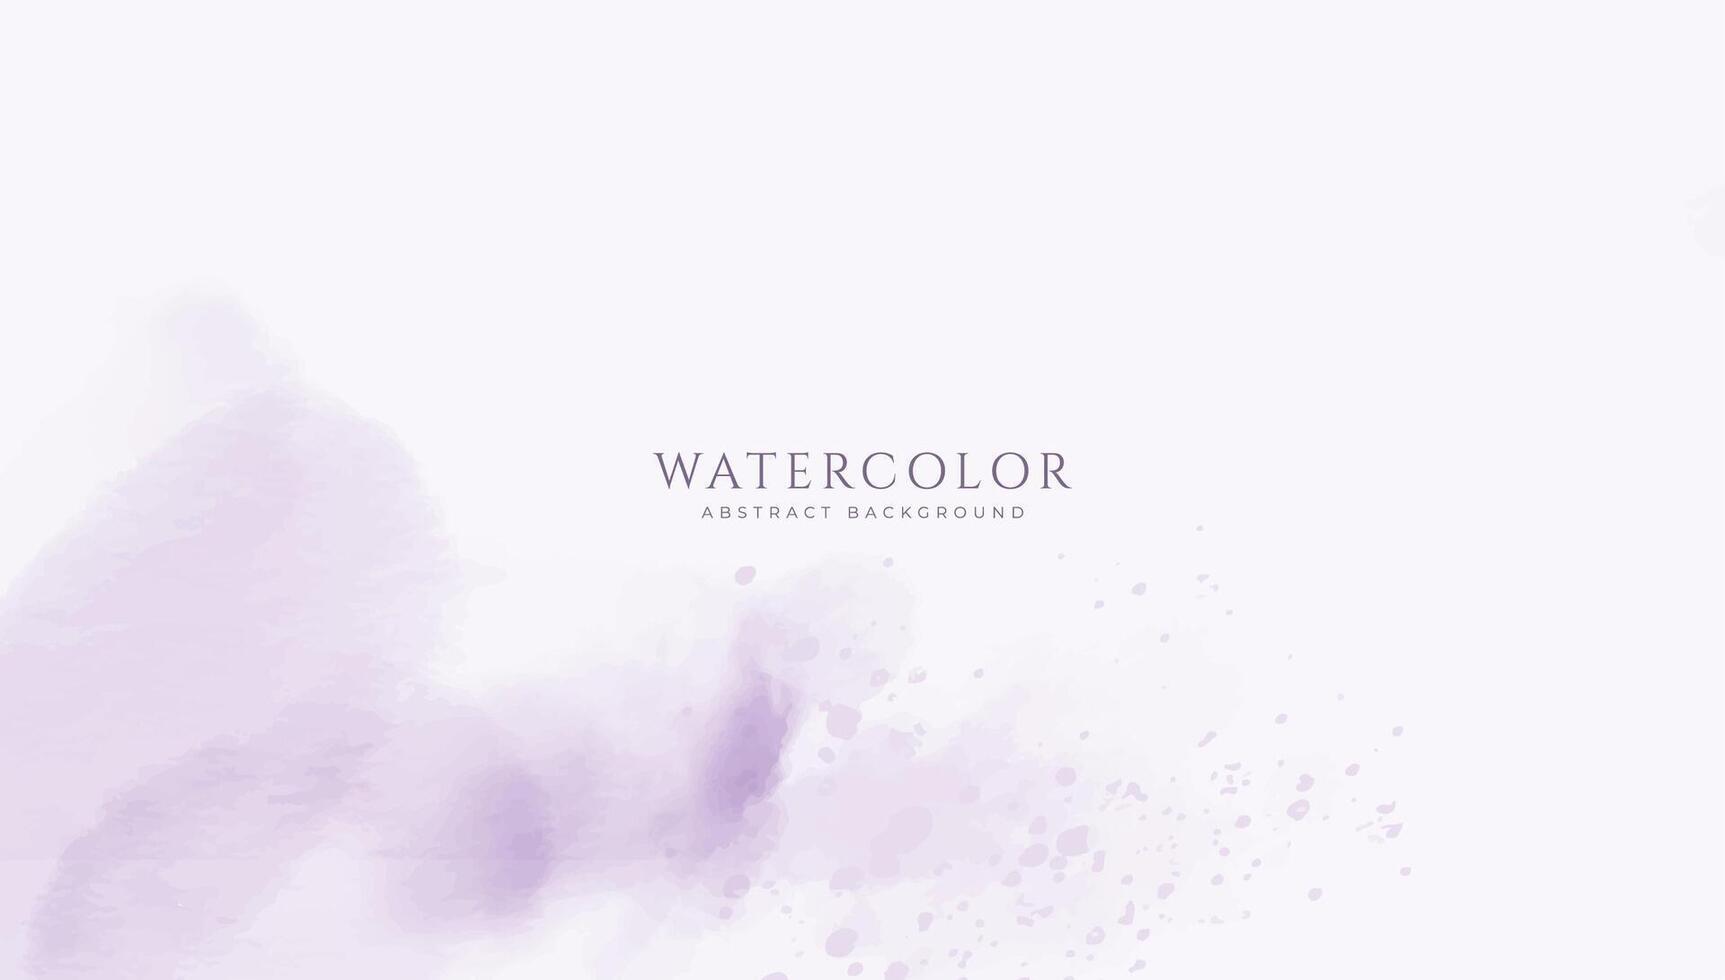 Abstract horizontal watercolor background. Neutral purple pink white colored empty space background illustration vector